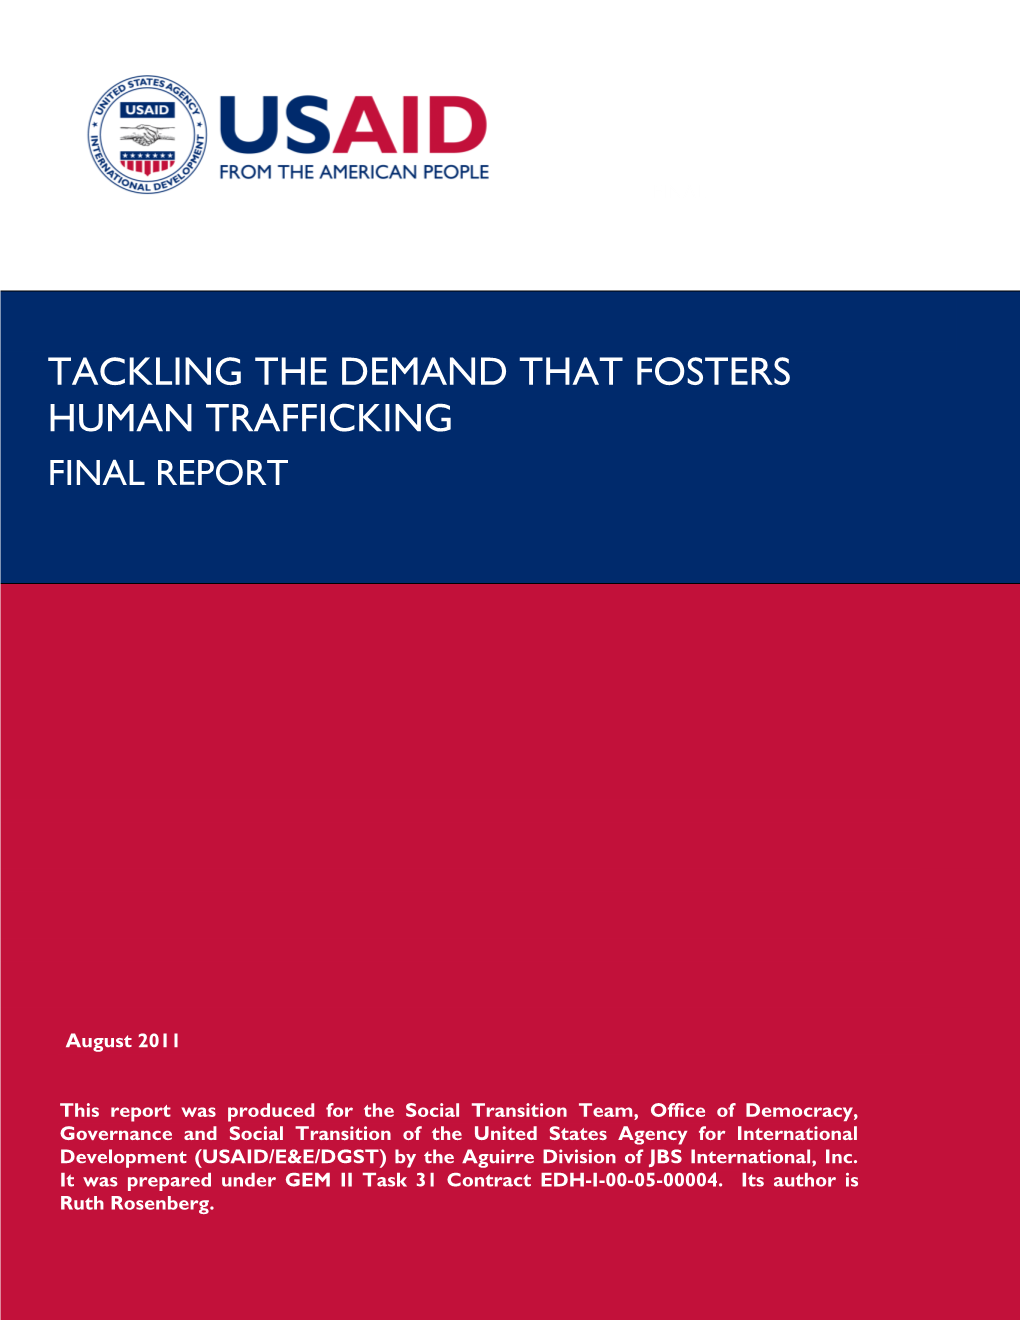 Tackling the Demand That Fosters Human Trafficking